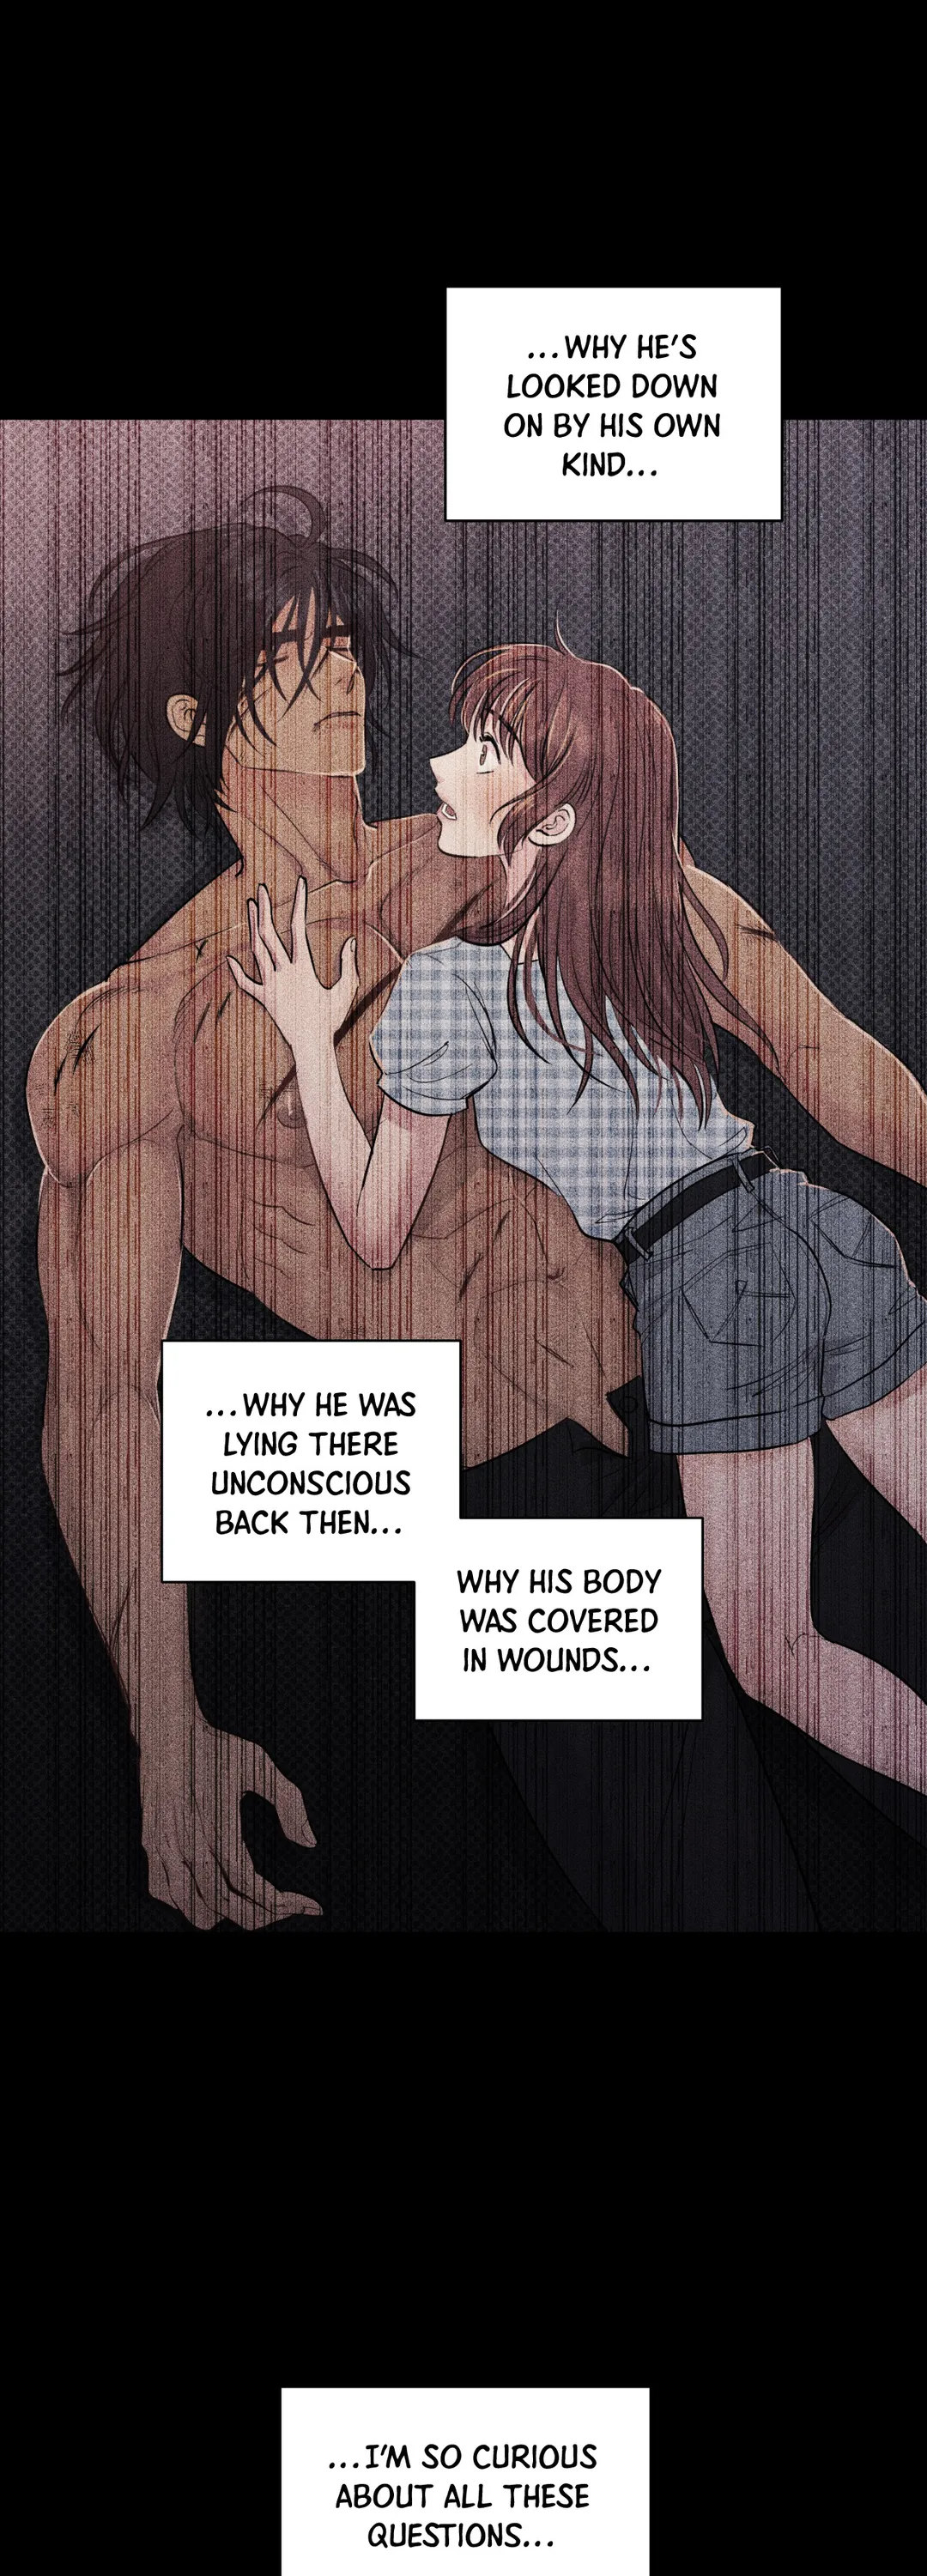 Hana’s Demons of Lust - Chapter 52 Page 28